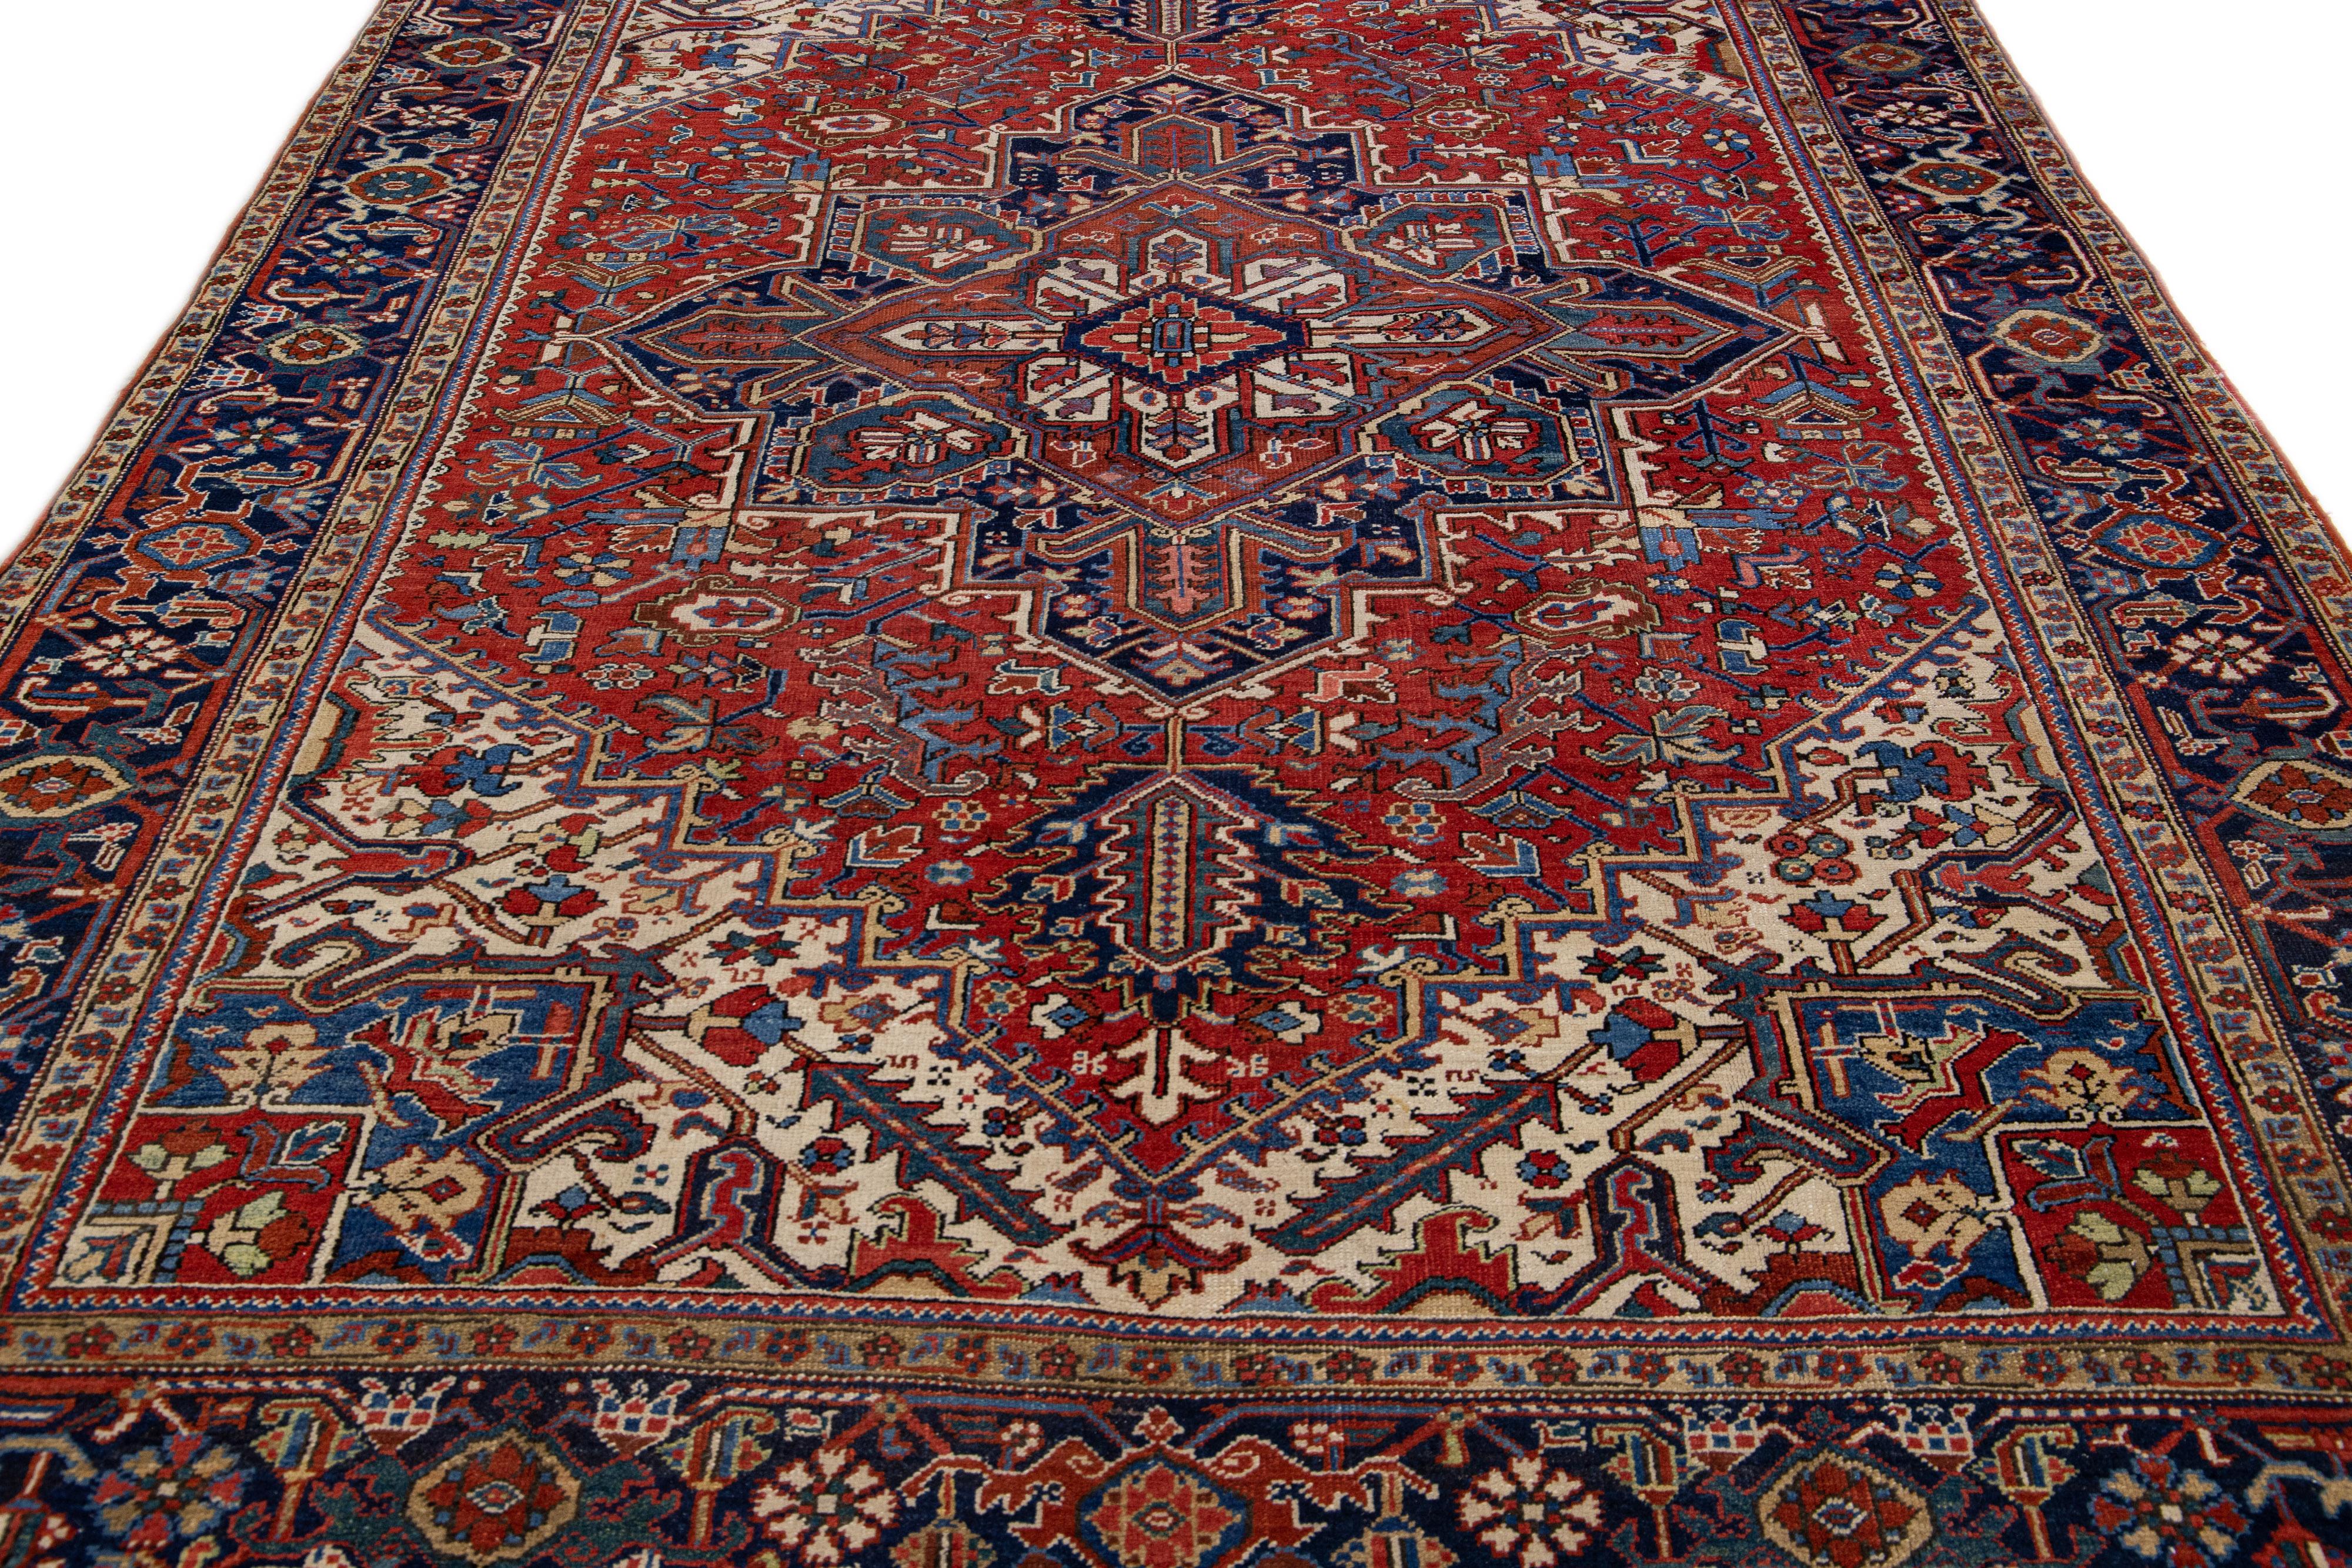 Beautiful antique Heriz hand-knotted wool rug with a red color field. This Persian rug has multicolor accents in a gorgeous all-over medallion floral motif.

This rug measures: 8'2